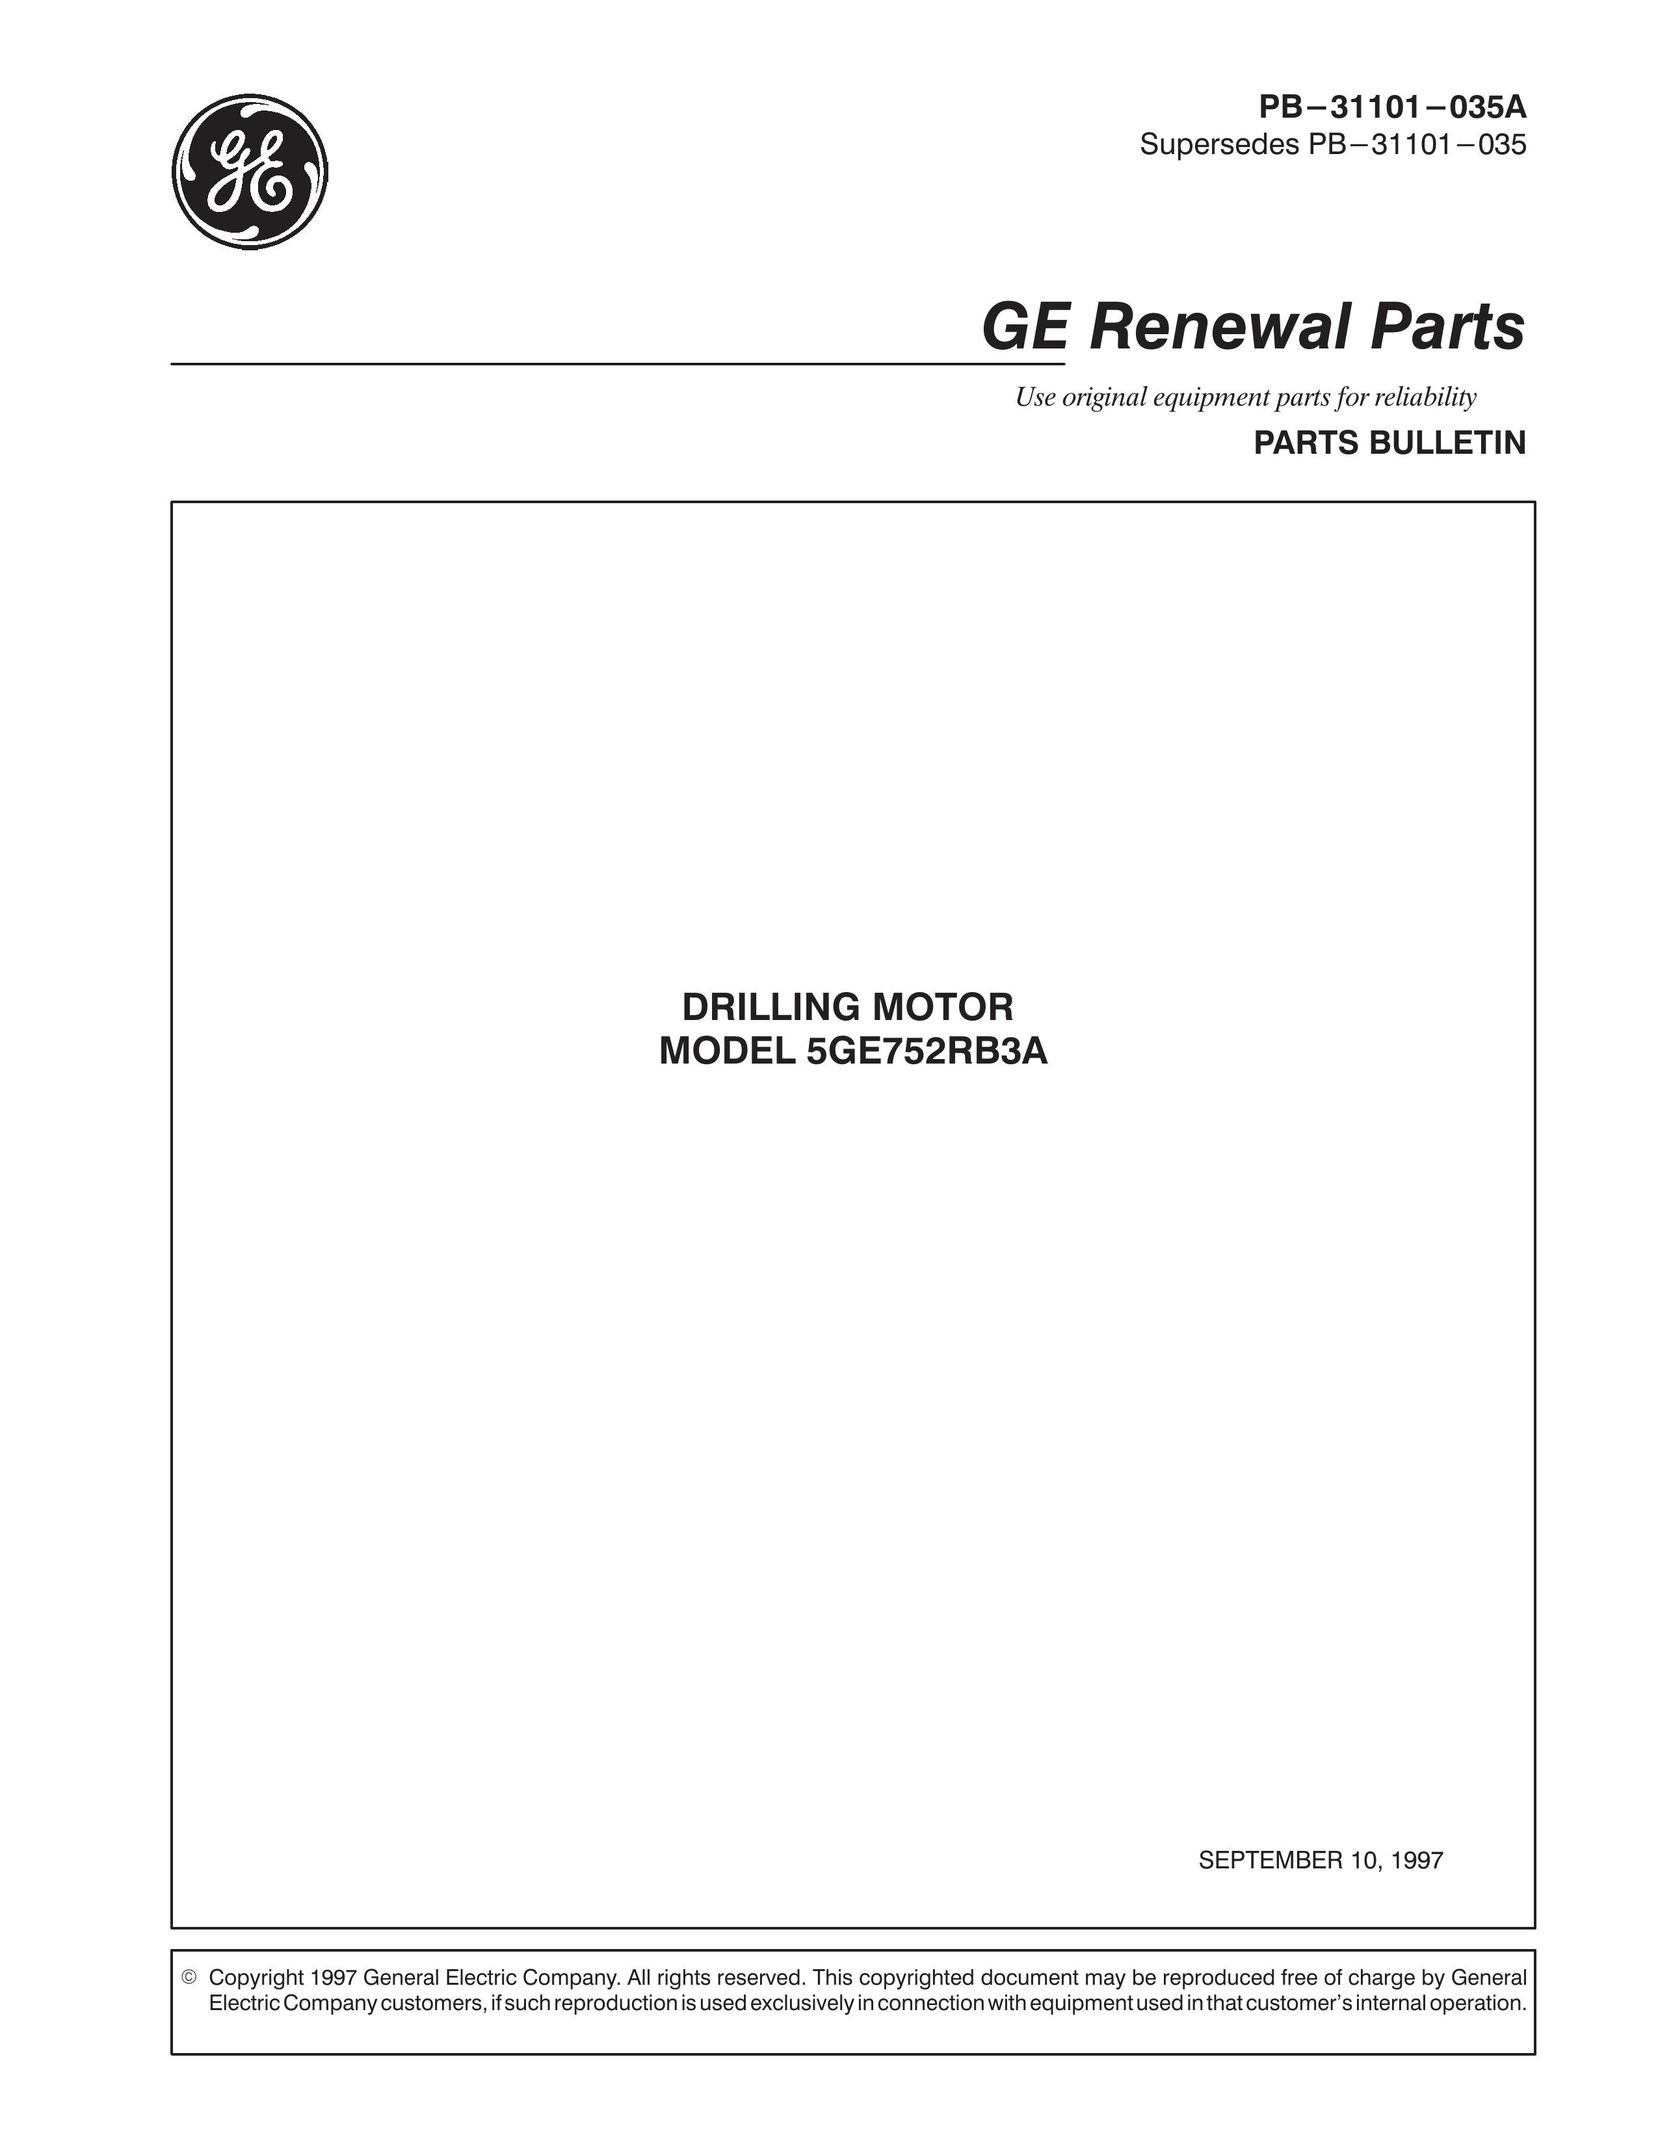 GE 5GE752RB3A Drill User Manual